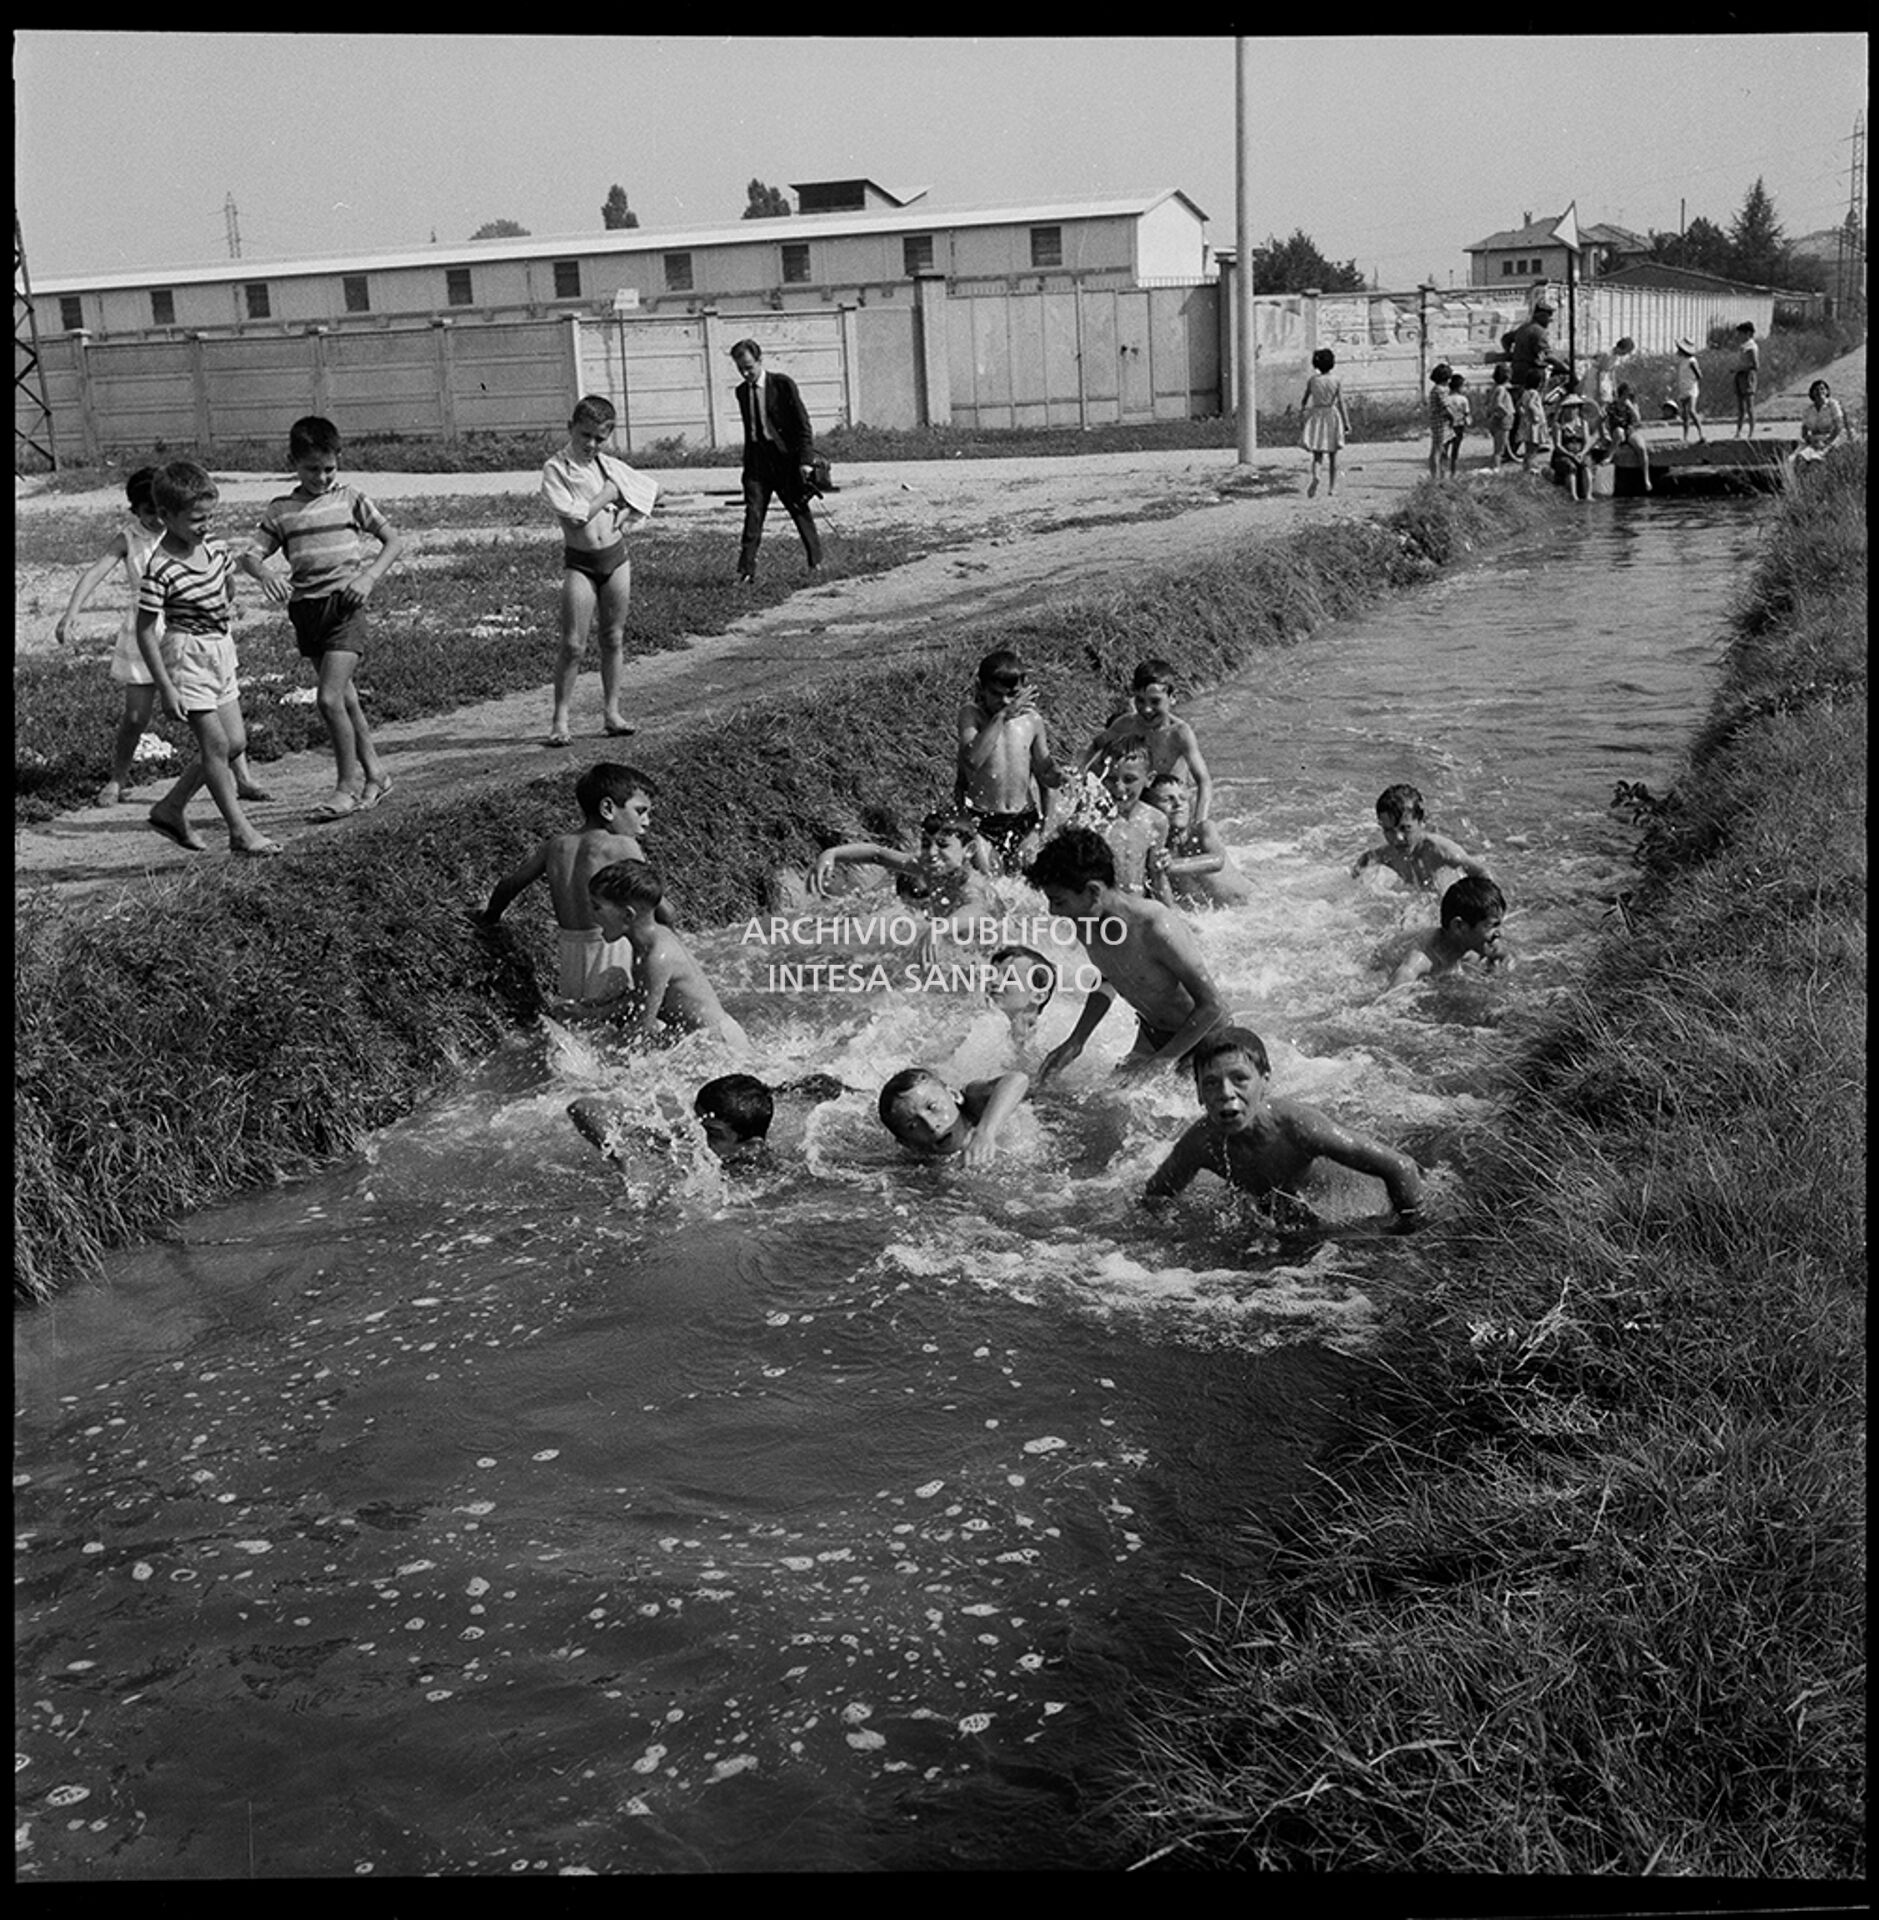 Children take a dip in a canal on the outskirts of Milan